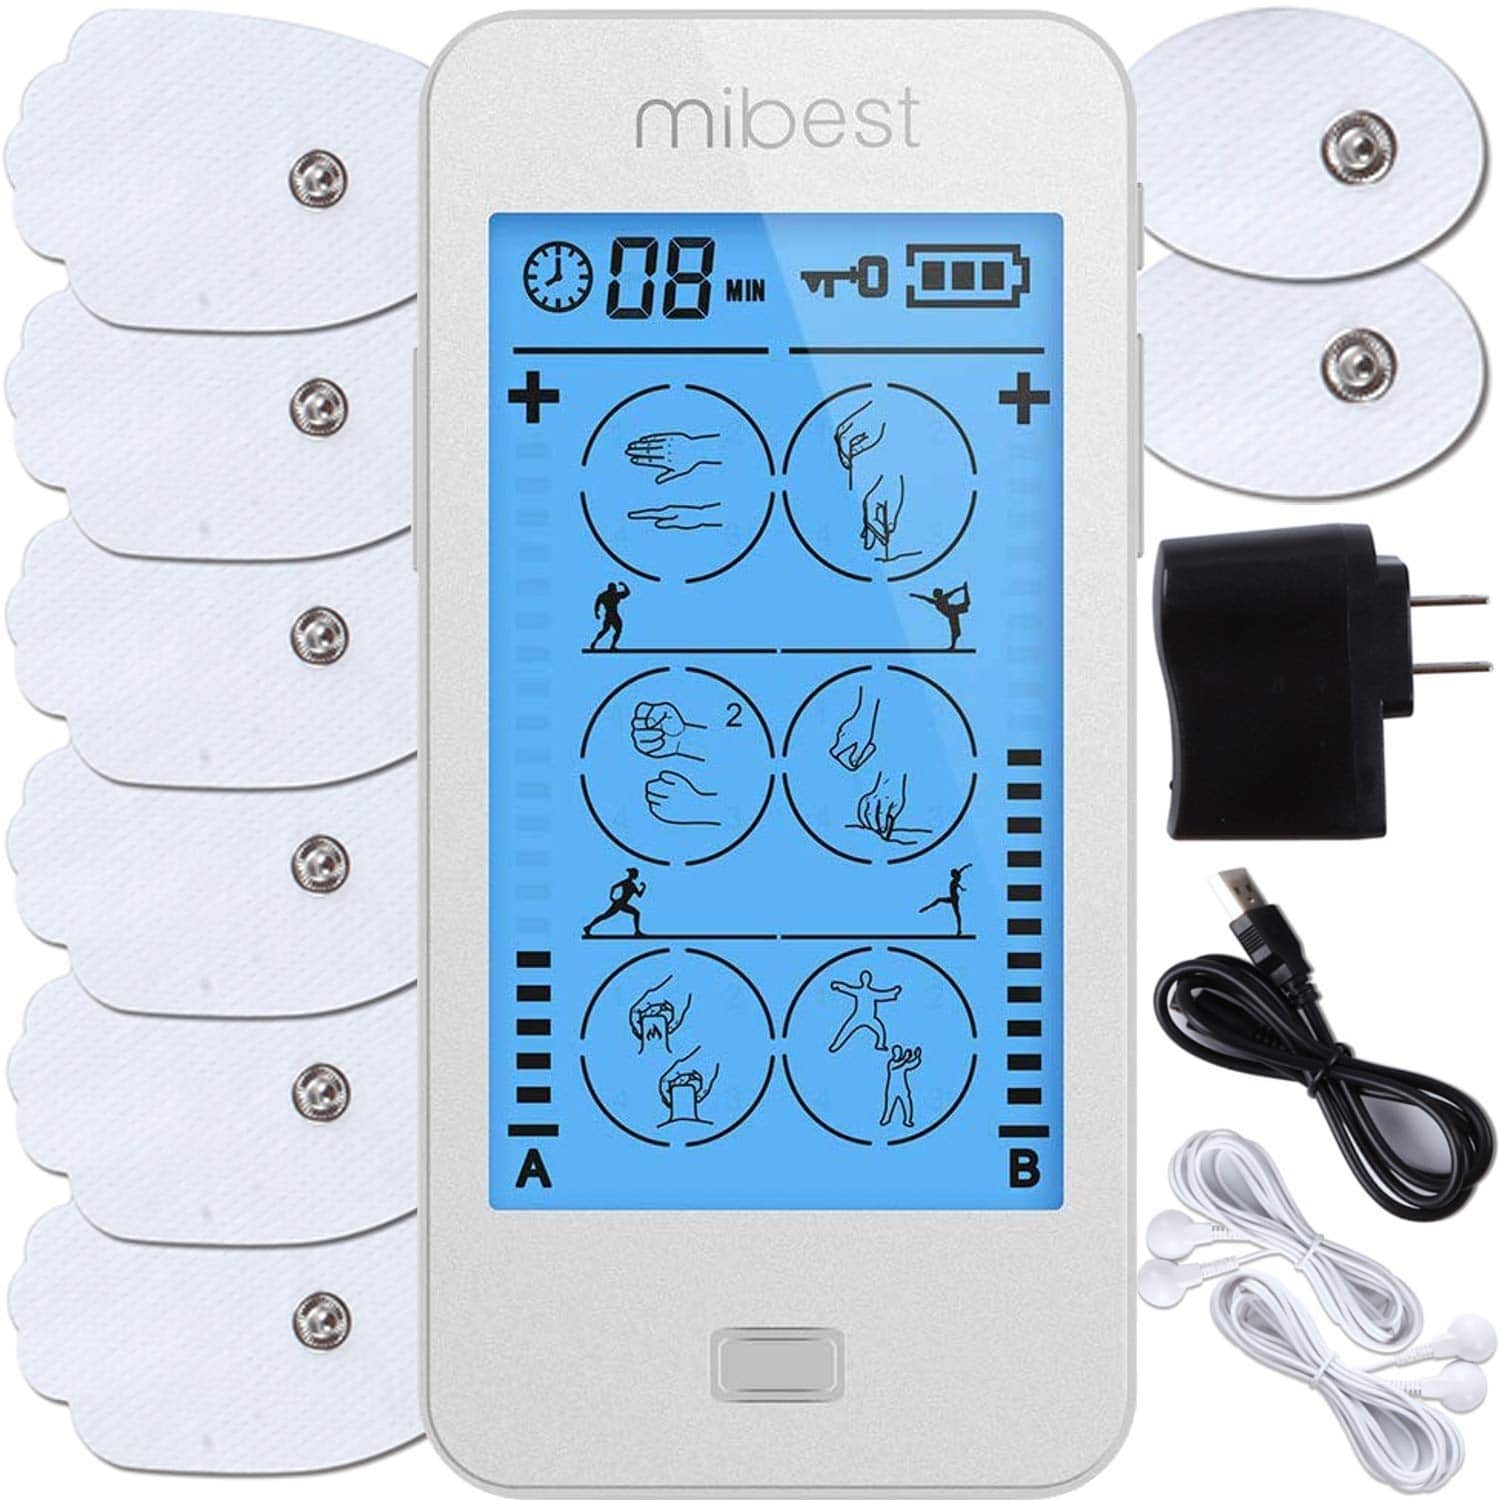 MIBEST Portable TENS Unit - Electronic Pulse Massager-EMS Electrotherapy Muscle Stimulator - Electronic Pulse Stimulator- Muscle Stimulator Machine for Women and Men